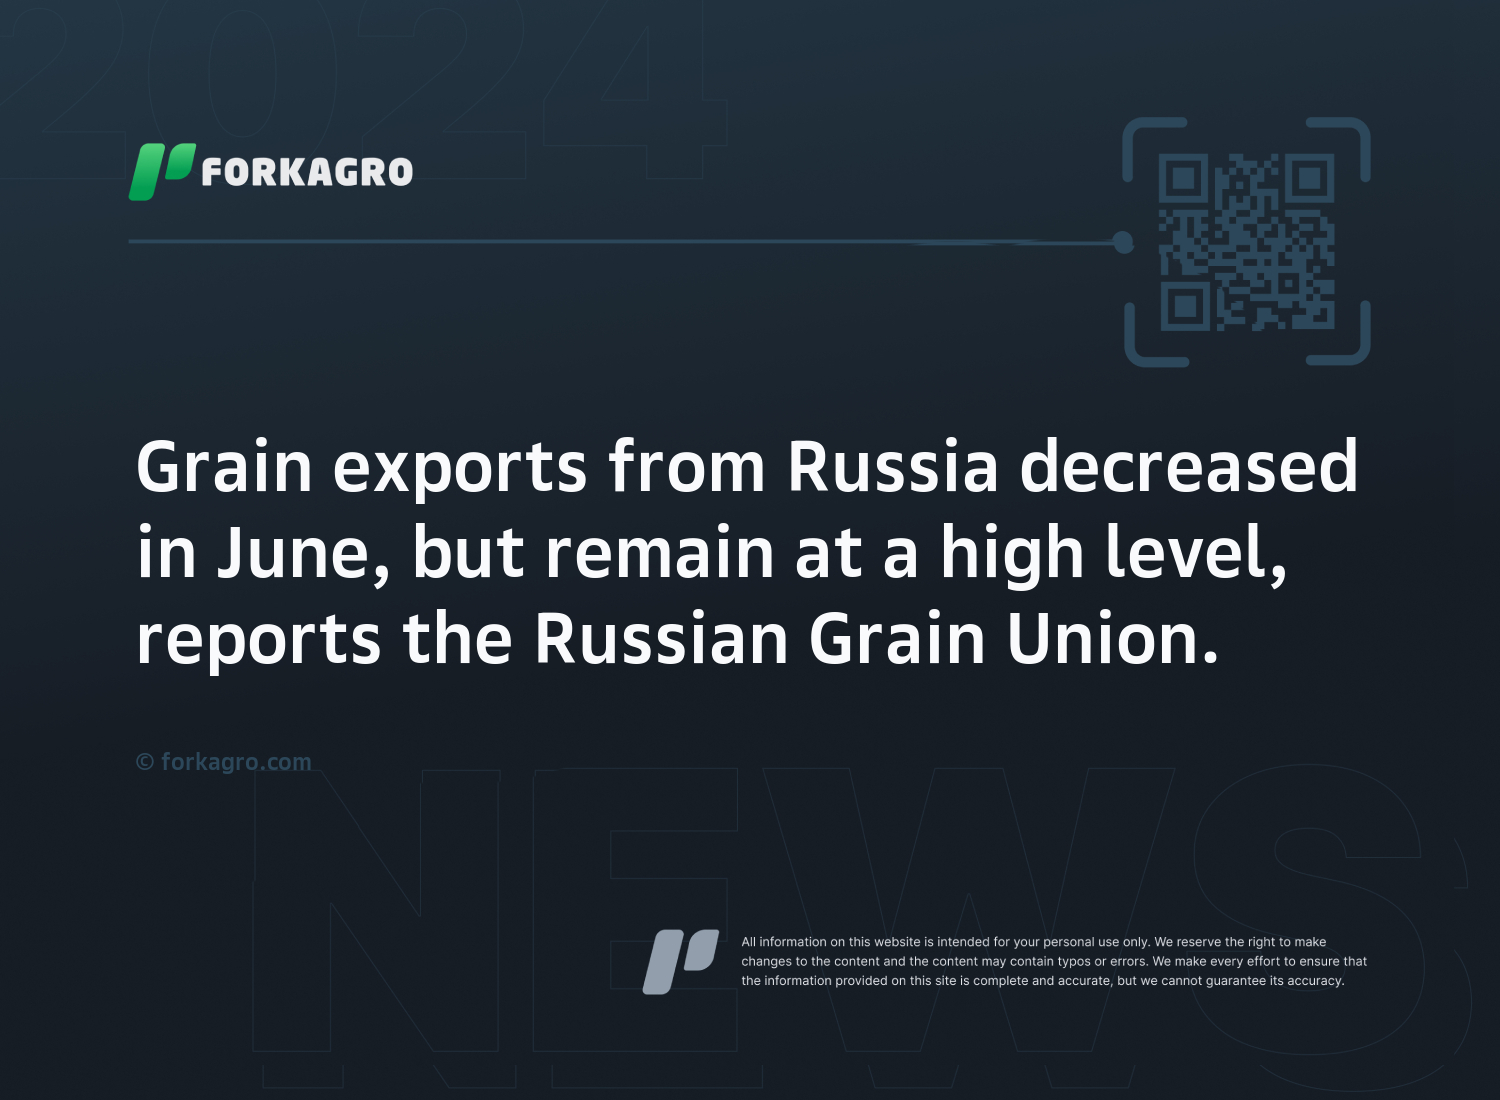 Grain exports from Russia decreased in June, but remain at a high level, reports the Russian Grain Union.